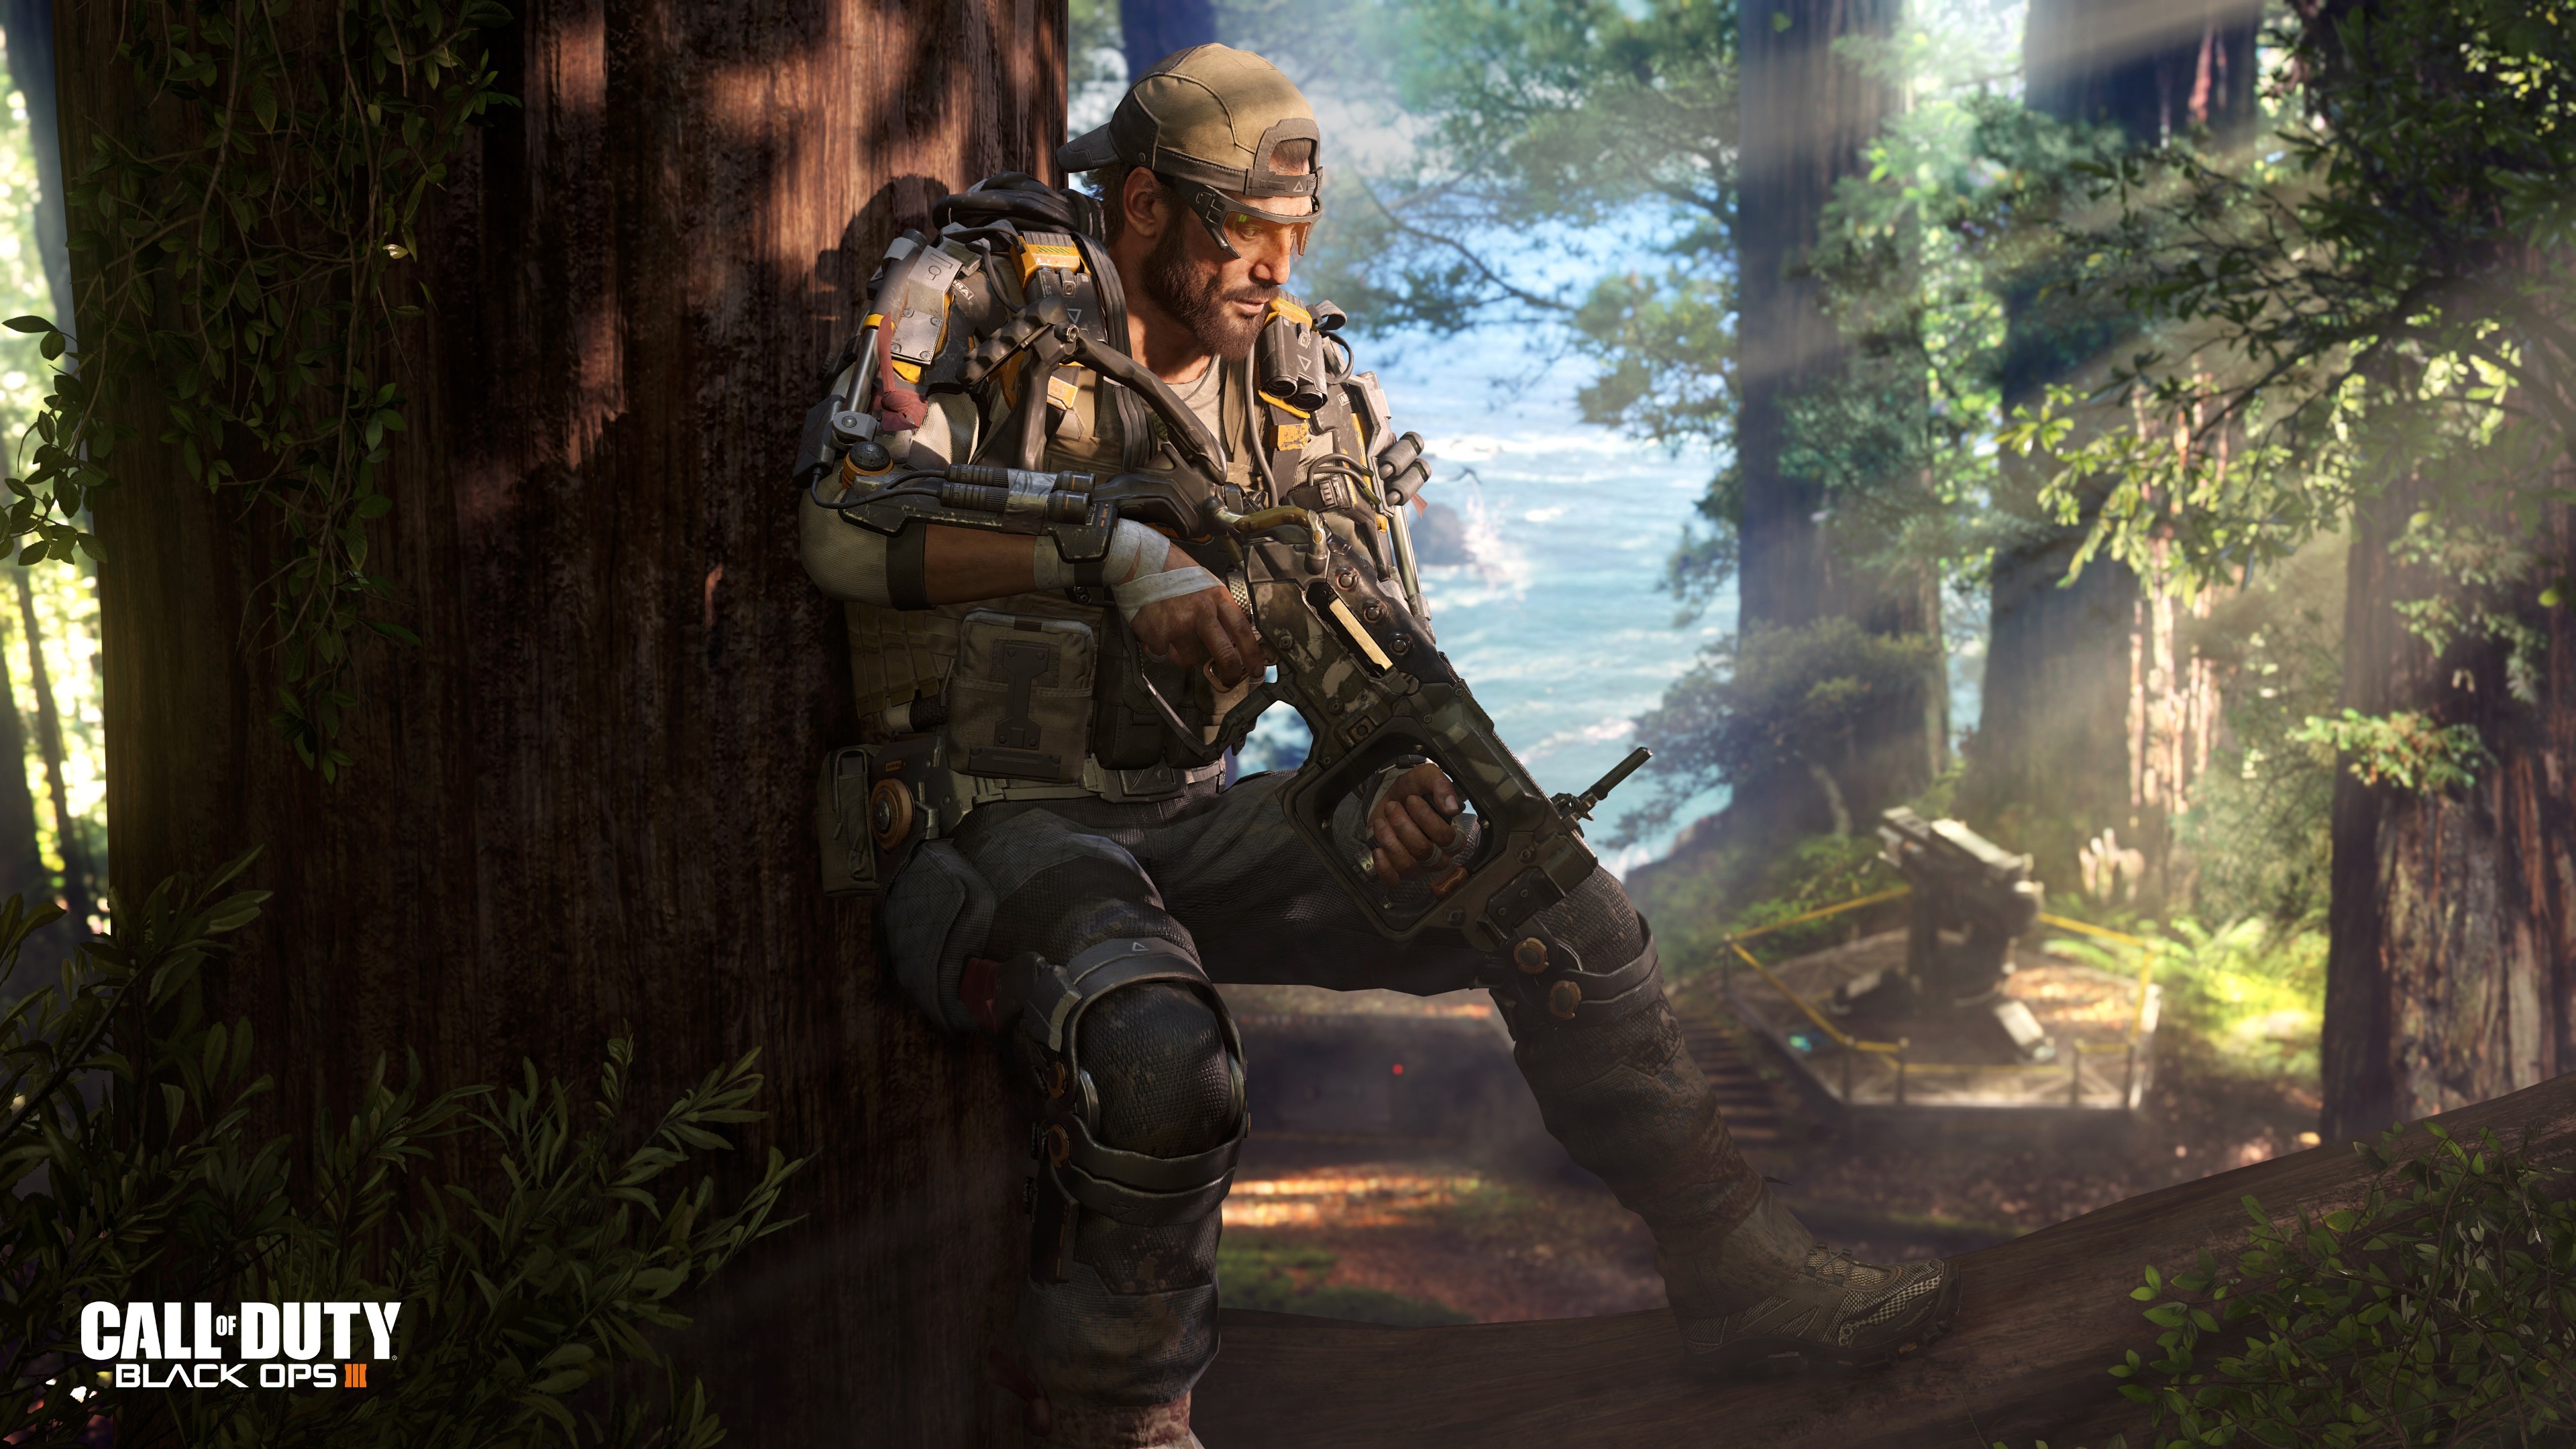 call_of_duty_black_ops_3_specialist_nomad-3840x2160.jpg